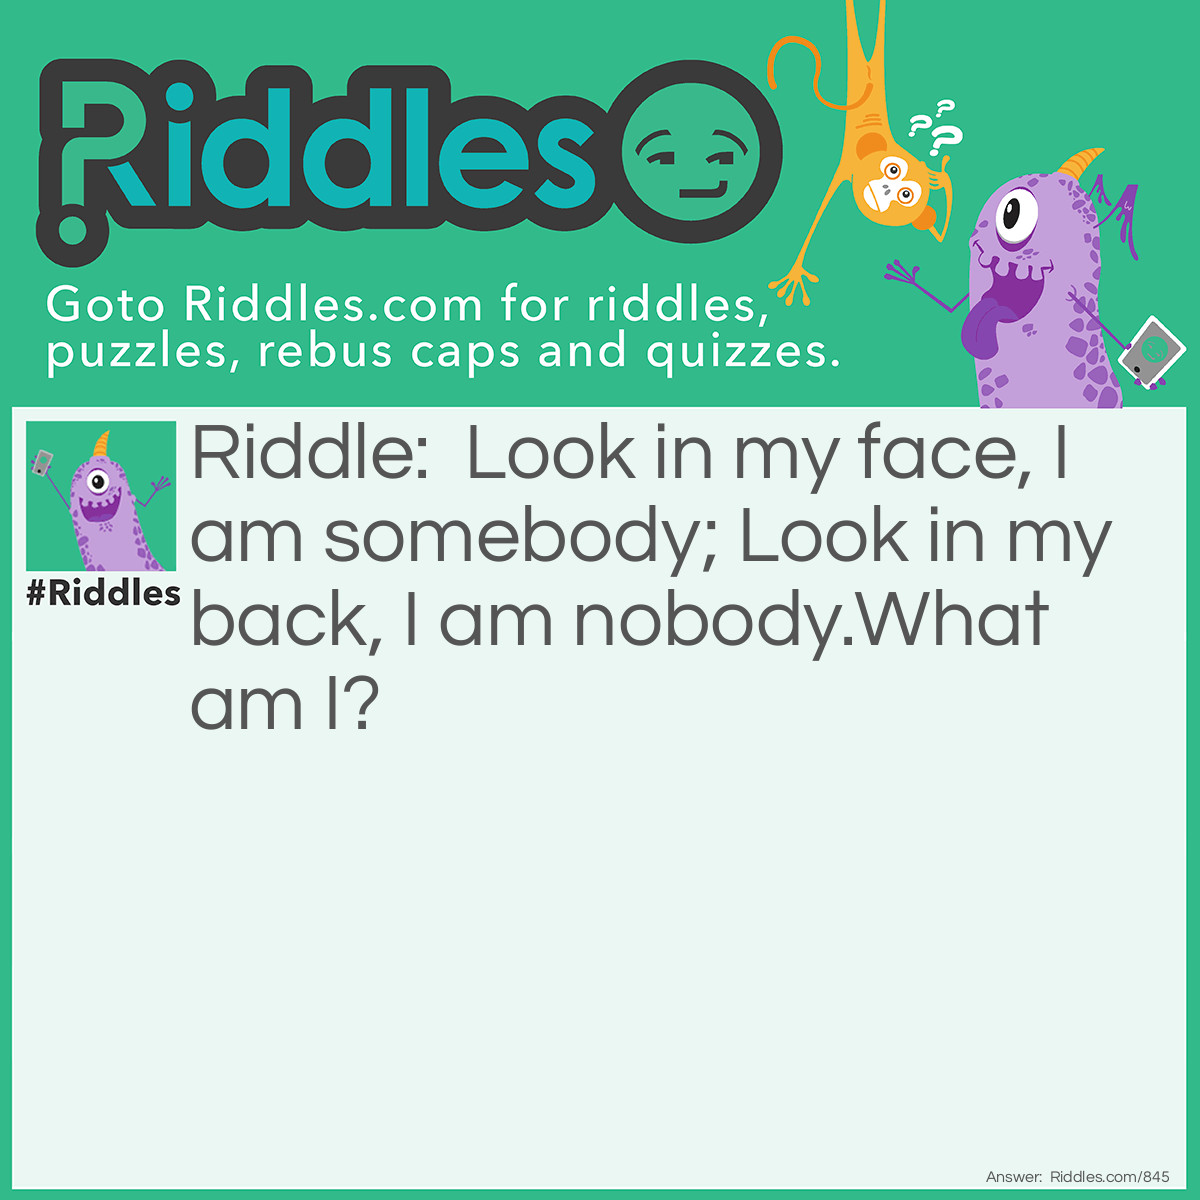 Riddle: Look in my face, I am somebody; Look in my back, I am nobody.
What am I? Answer: I am a mirror.